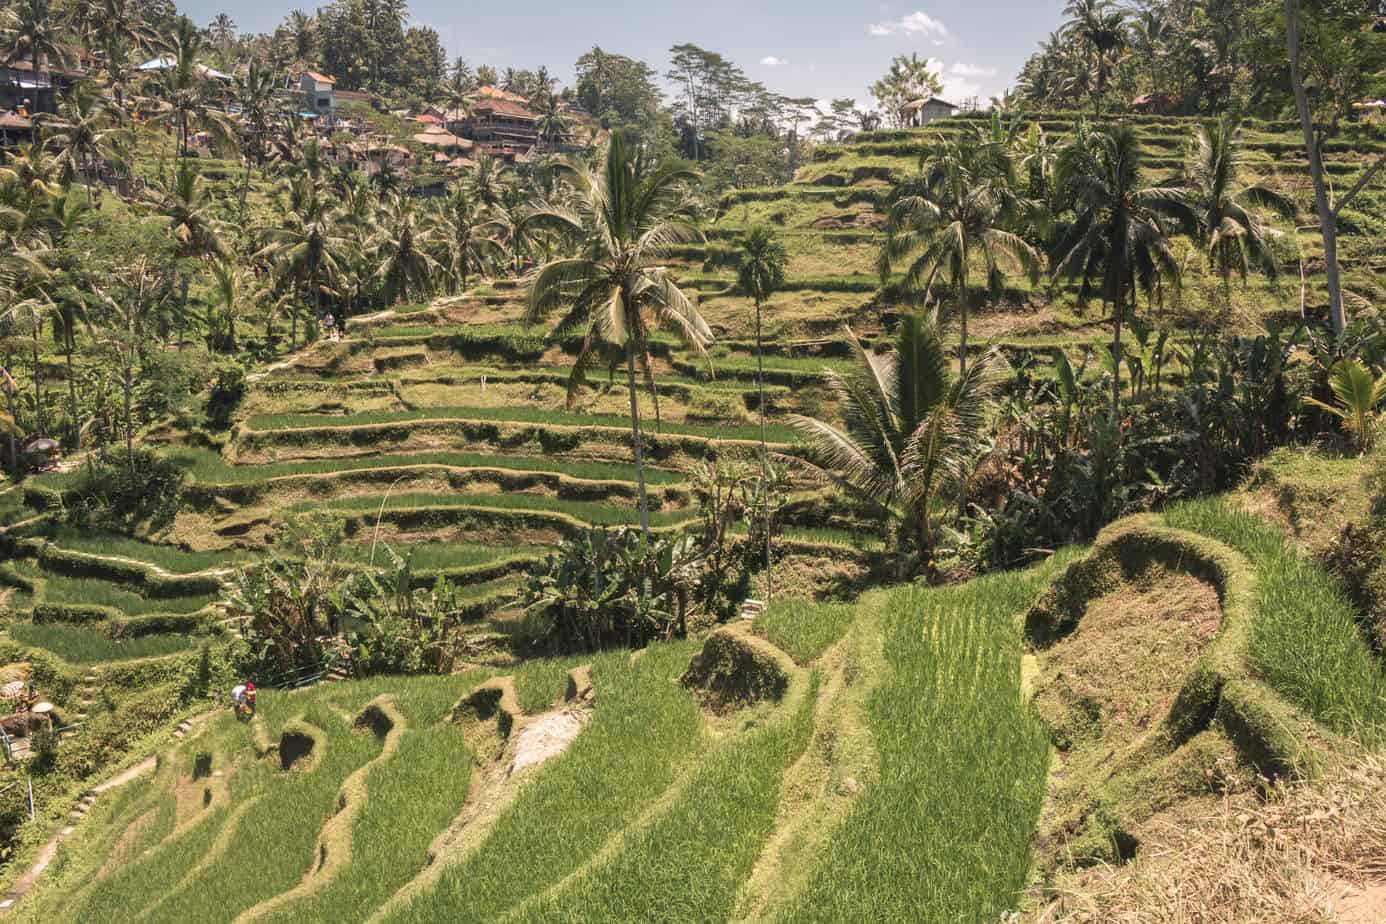 View of Tegallalang Rice Terraces in Bali